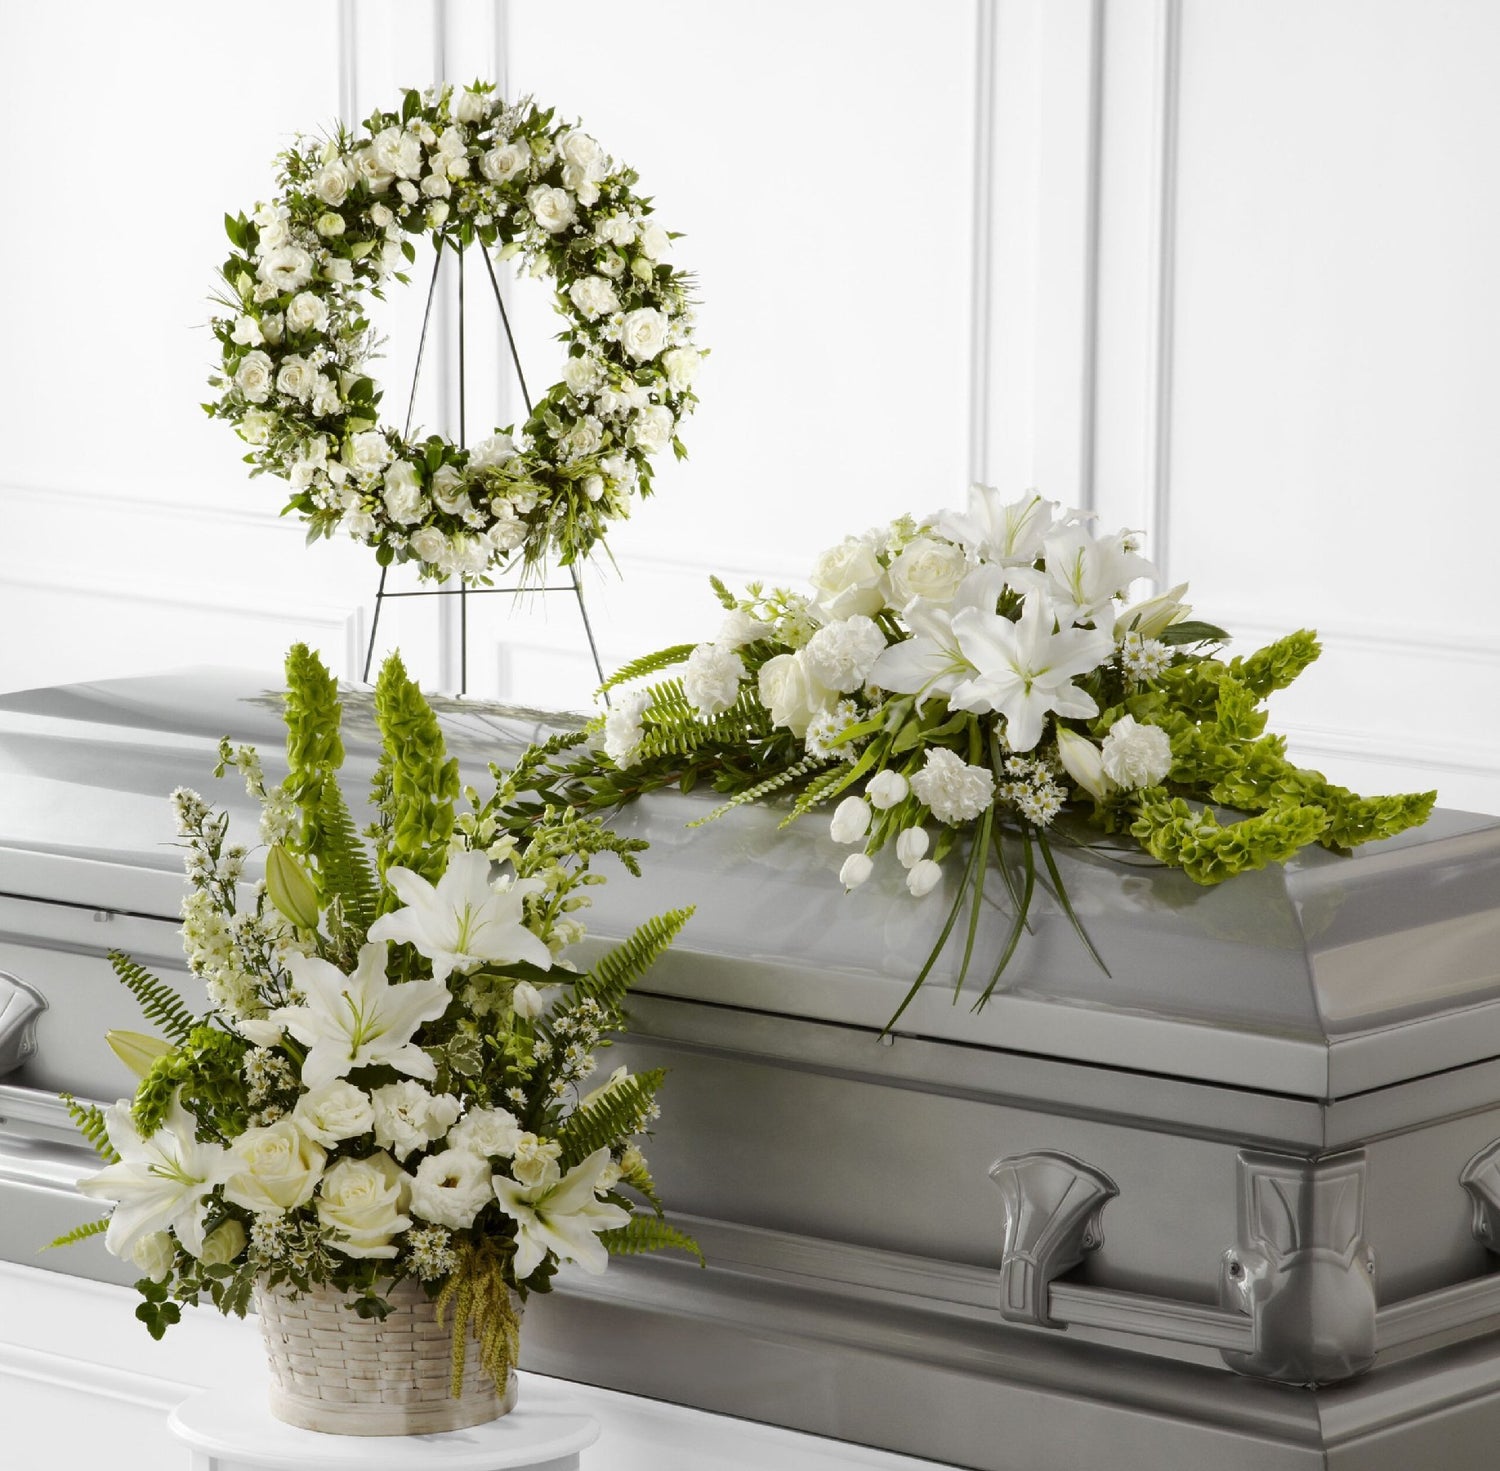 Funeral Casket Covers - Flower Delivery NYC